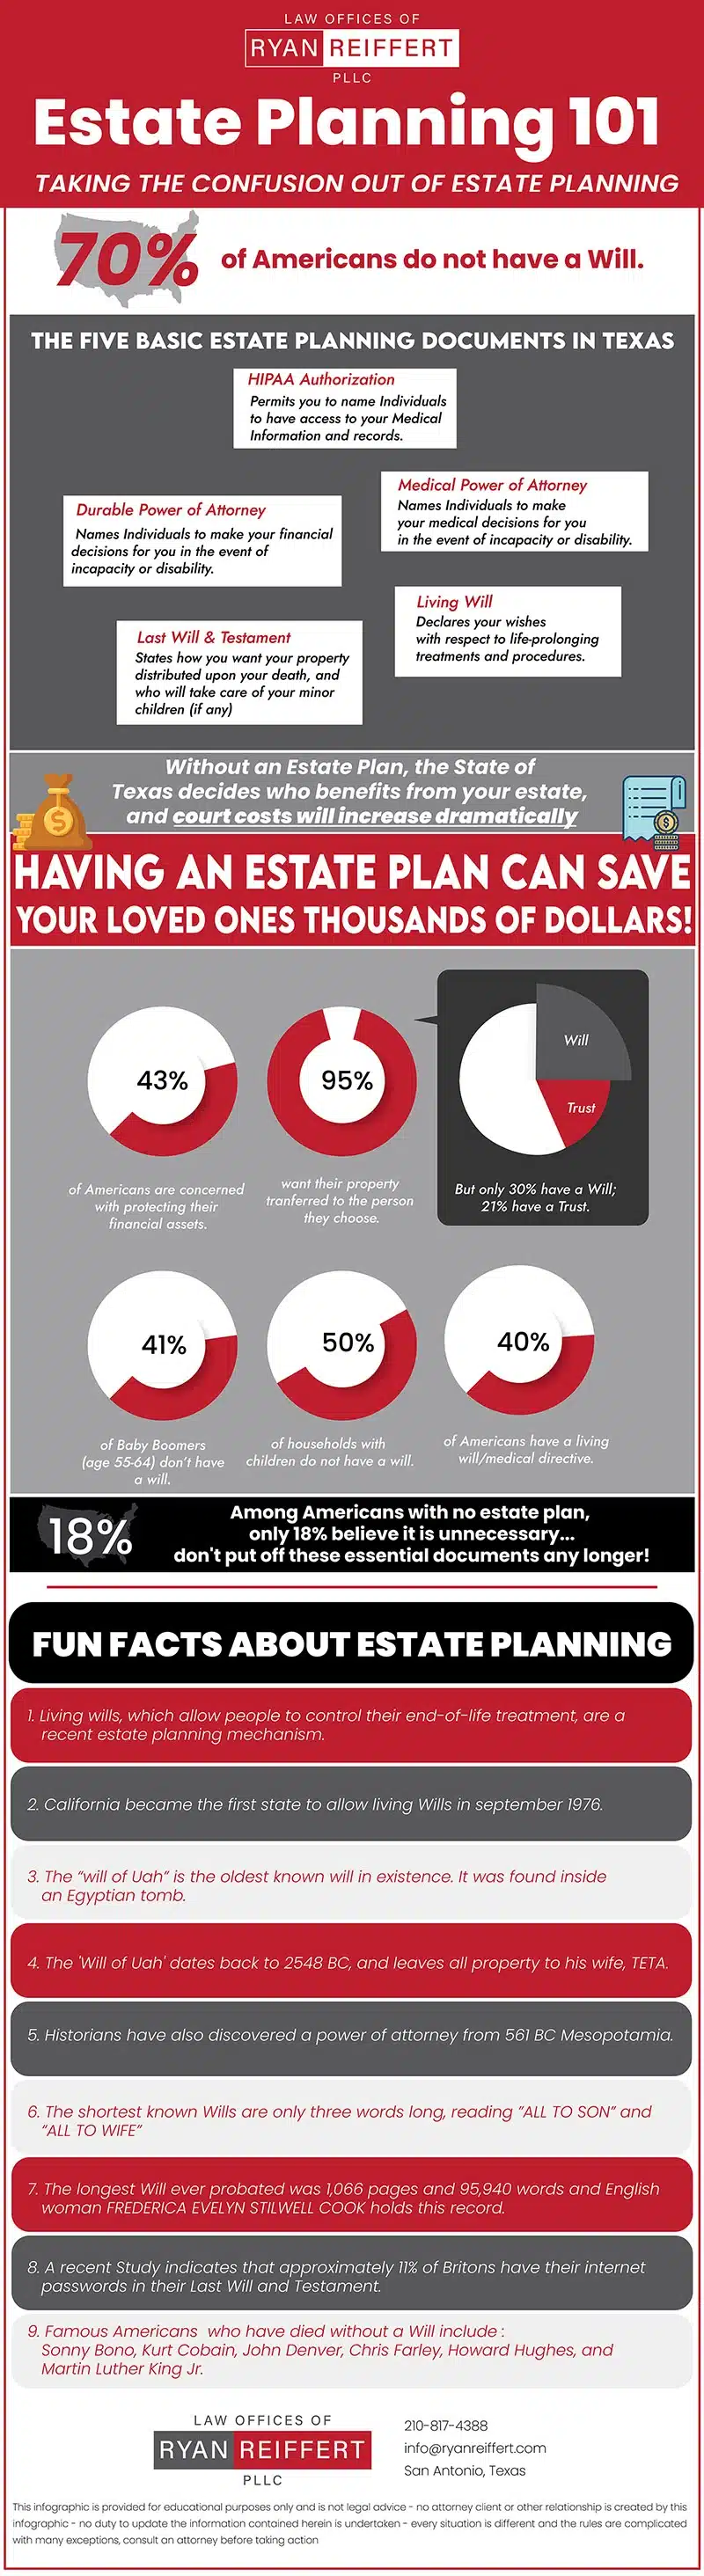 A detailed infographic about Estate Planning in the US